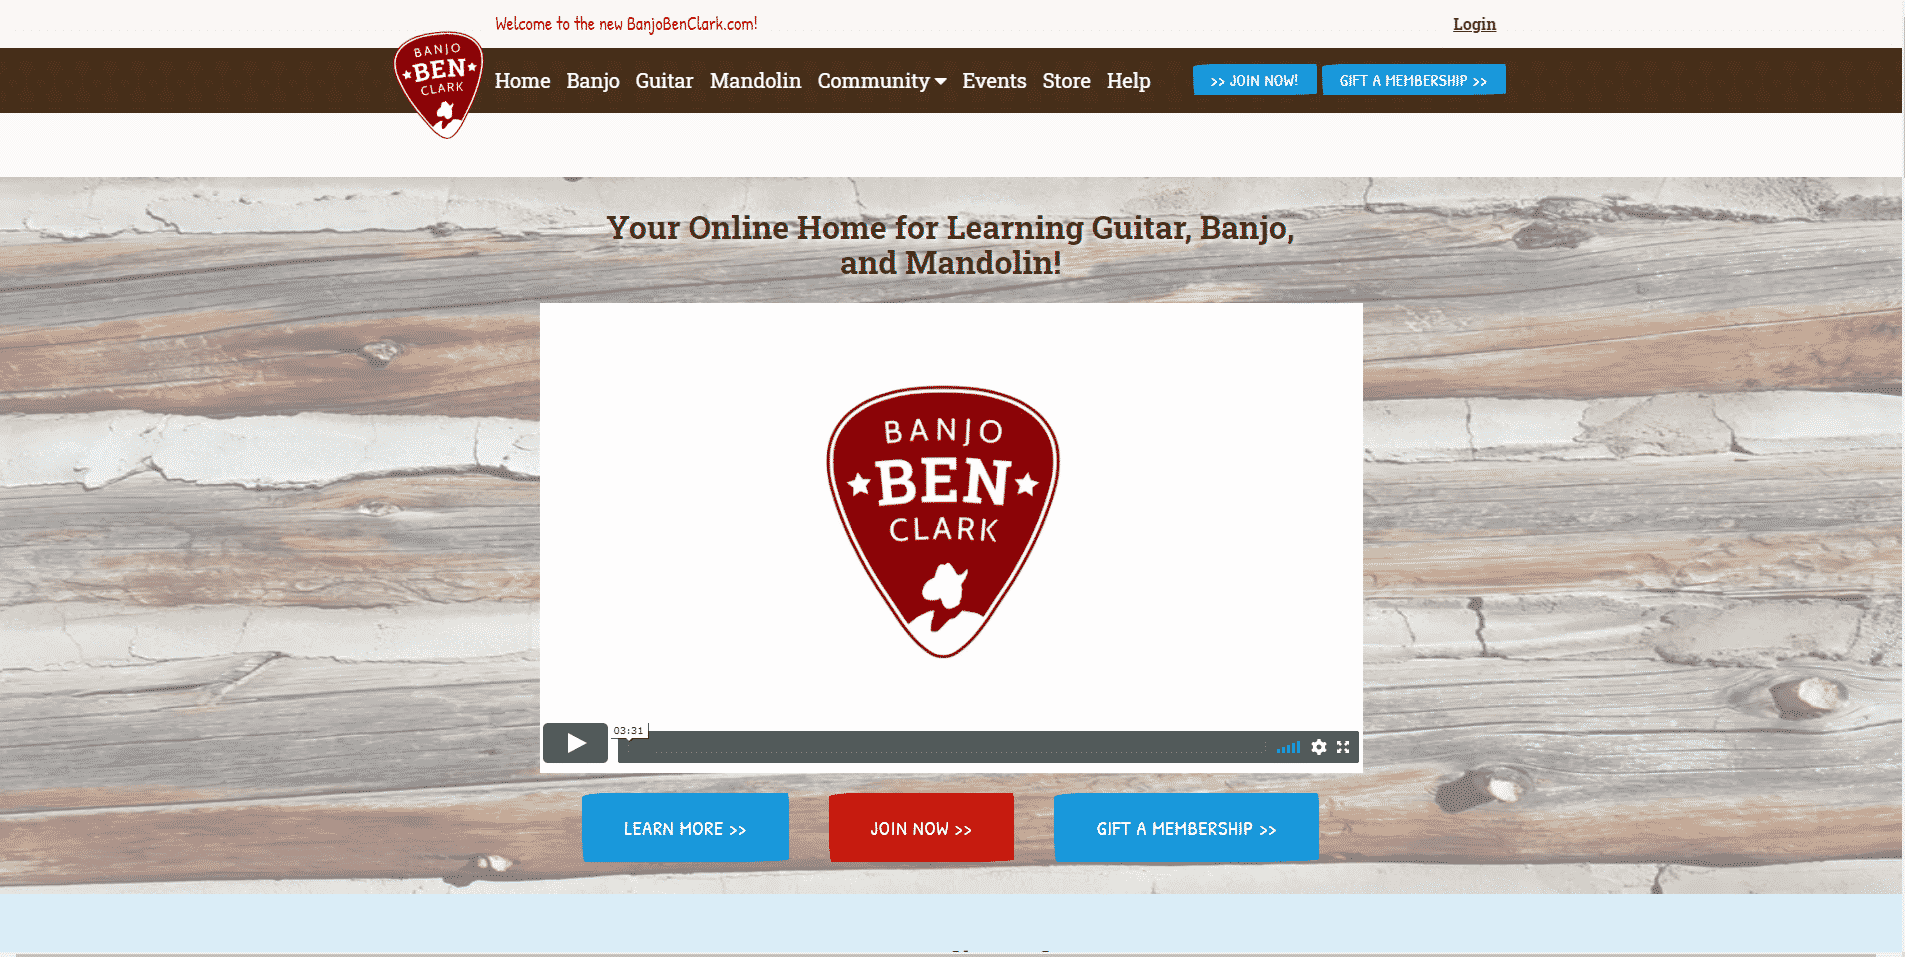 Your Online Home for Learning Guitar, Banjo, and Mandolin